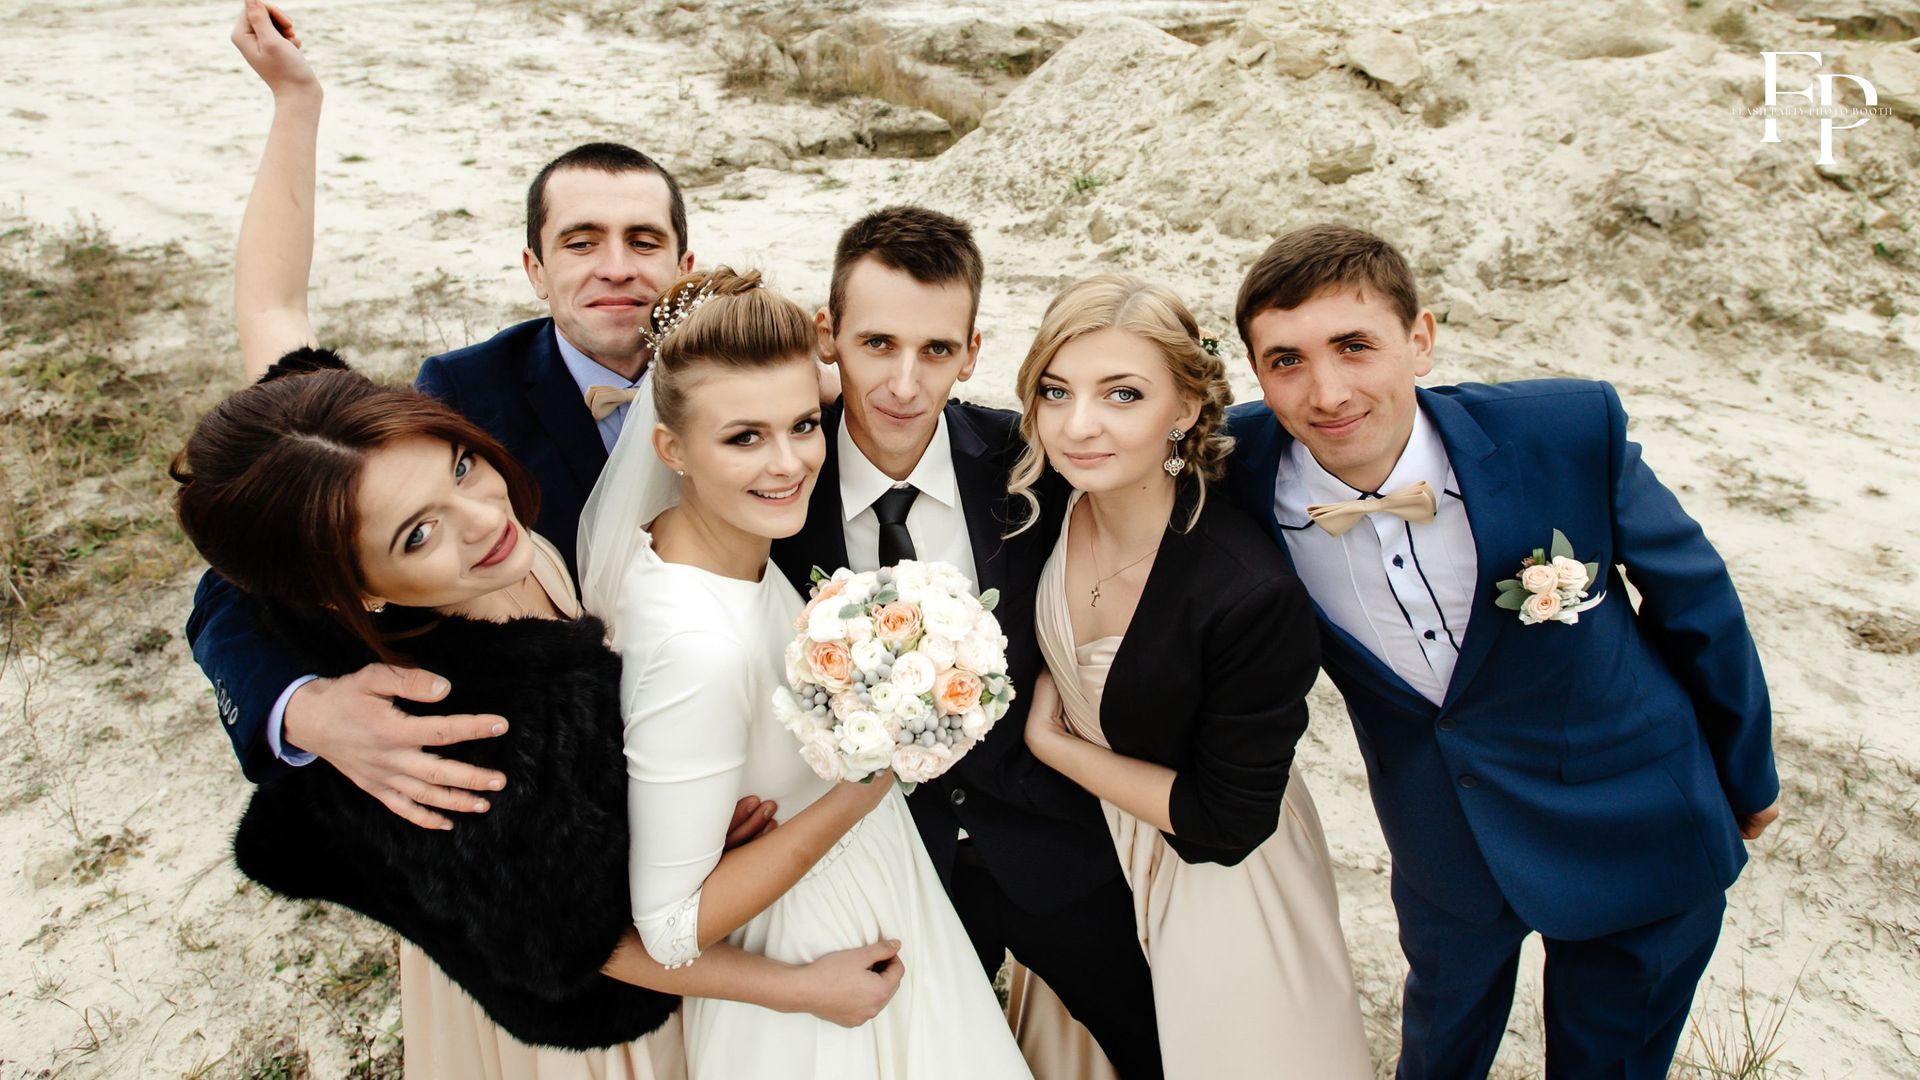 The bride and groom posing for a photo with their friends